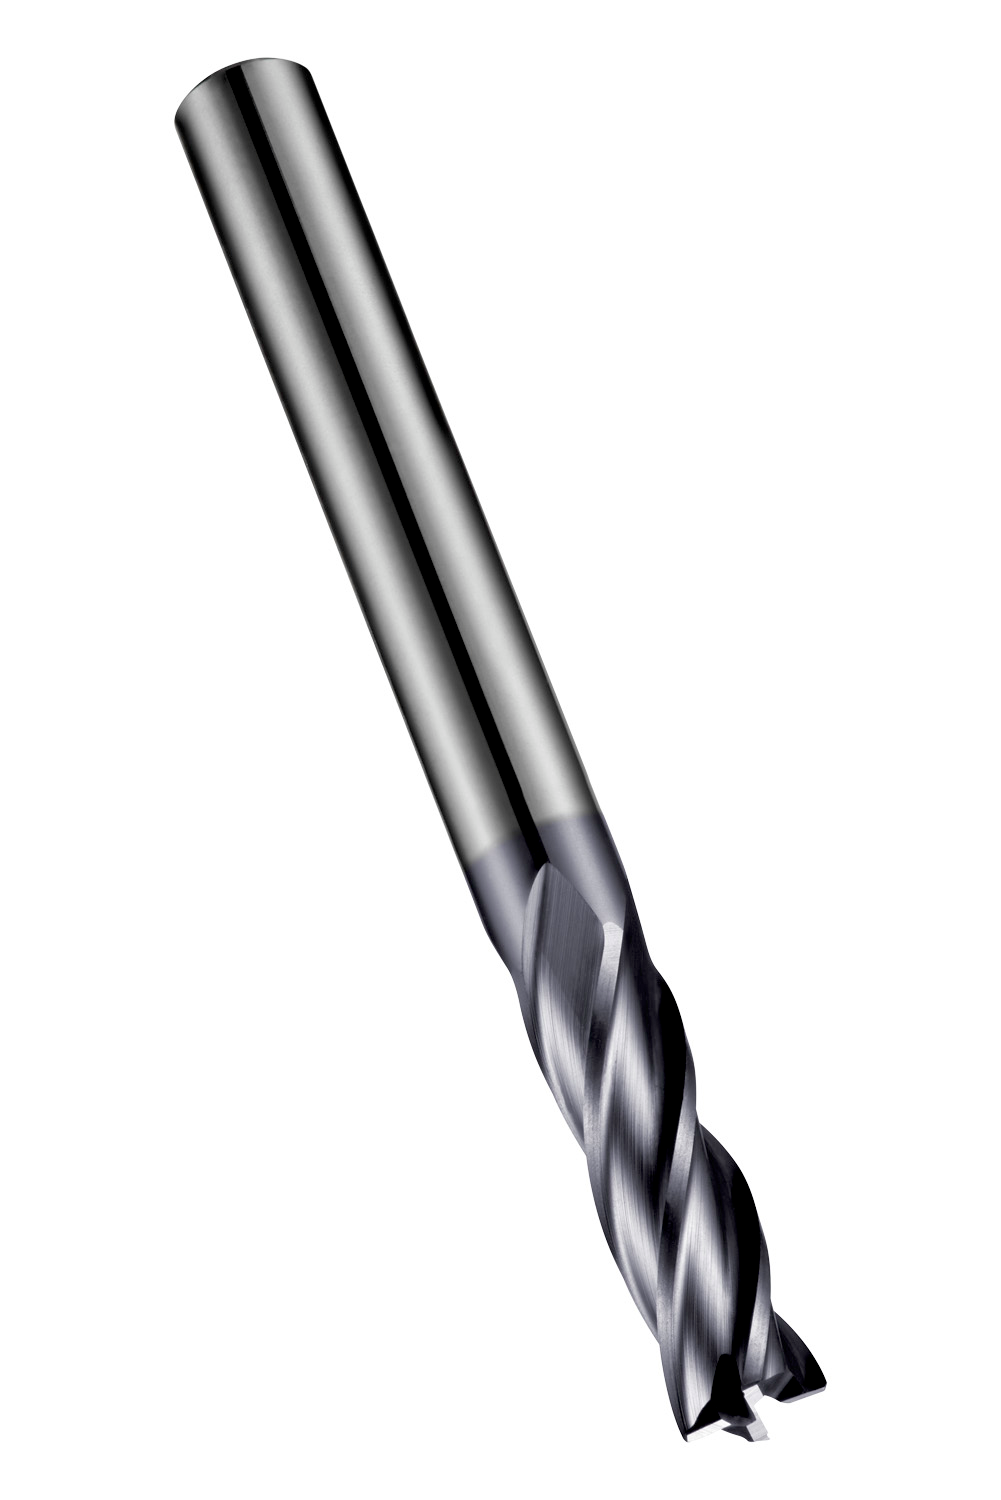 S9444.0 - End Mills